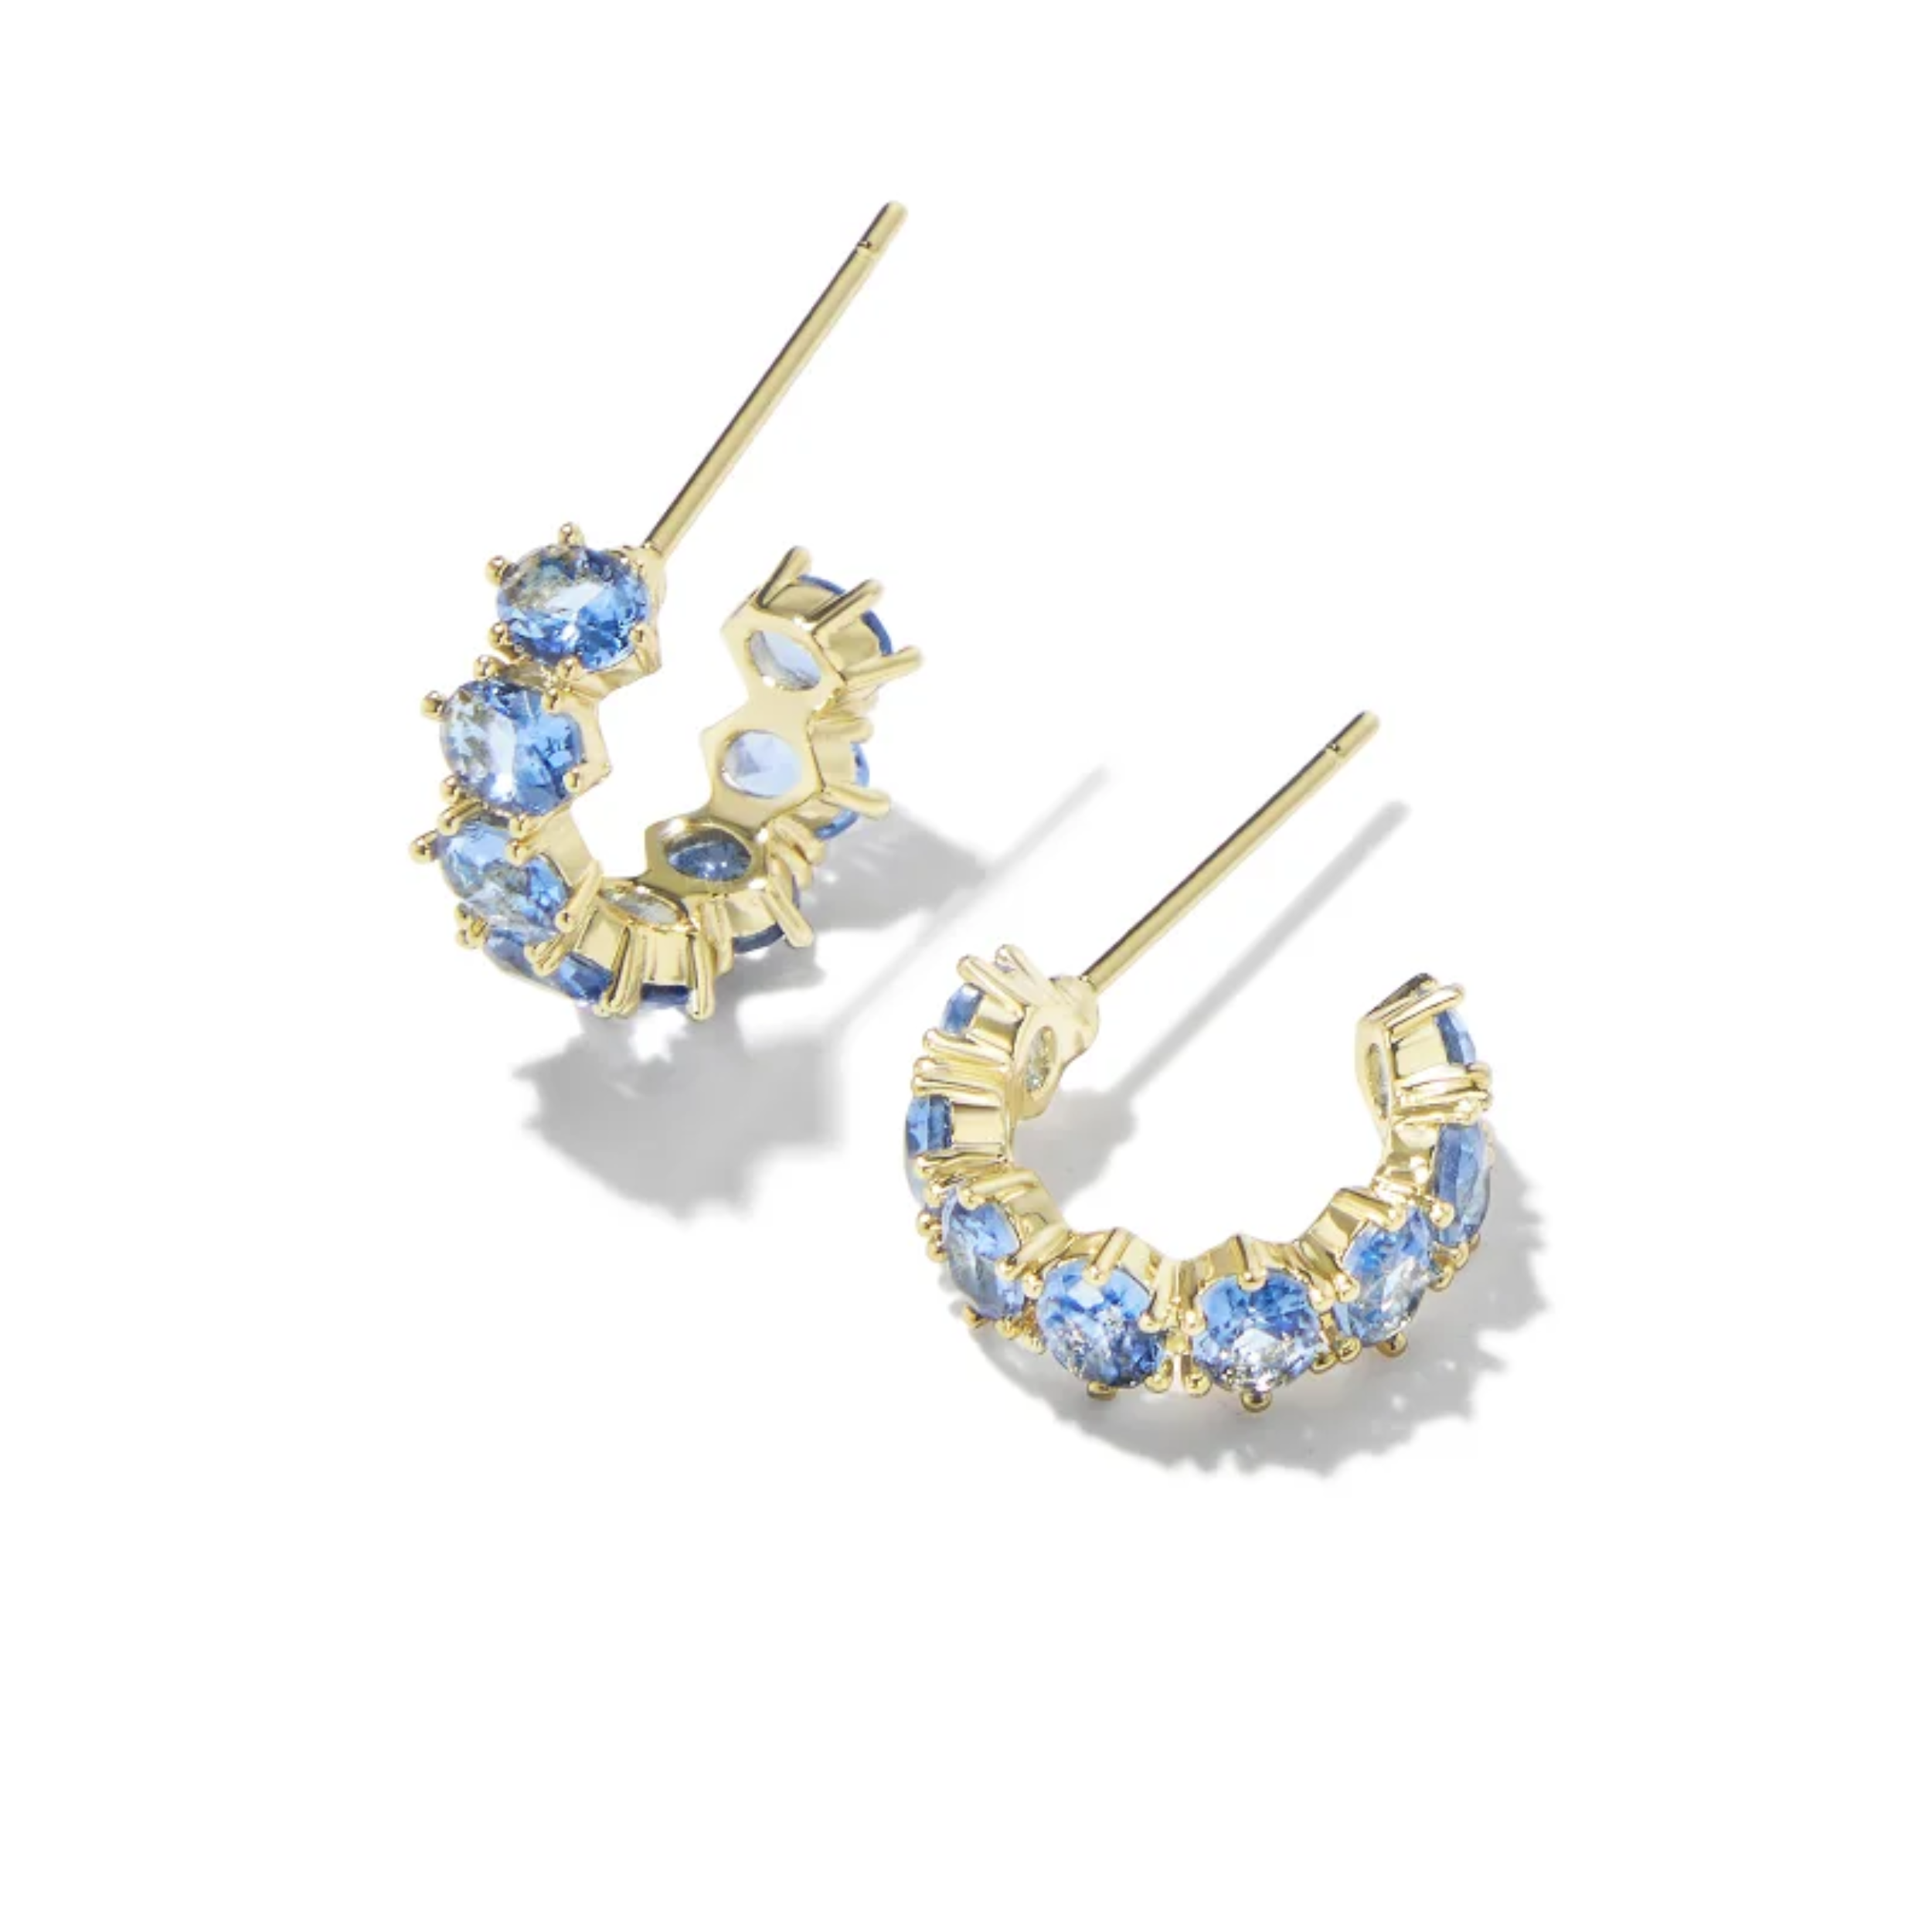 These Cailin Gold Crystal Huggie Earrings in Blue Violet Crystal by Kendra Scott are pictured on a white background.